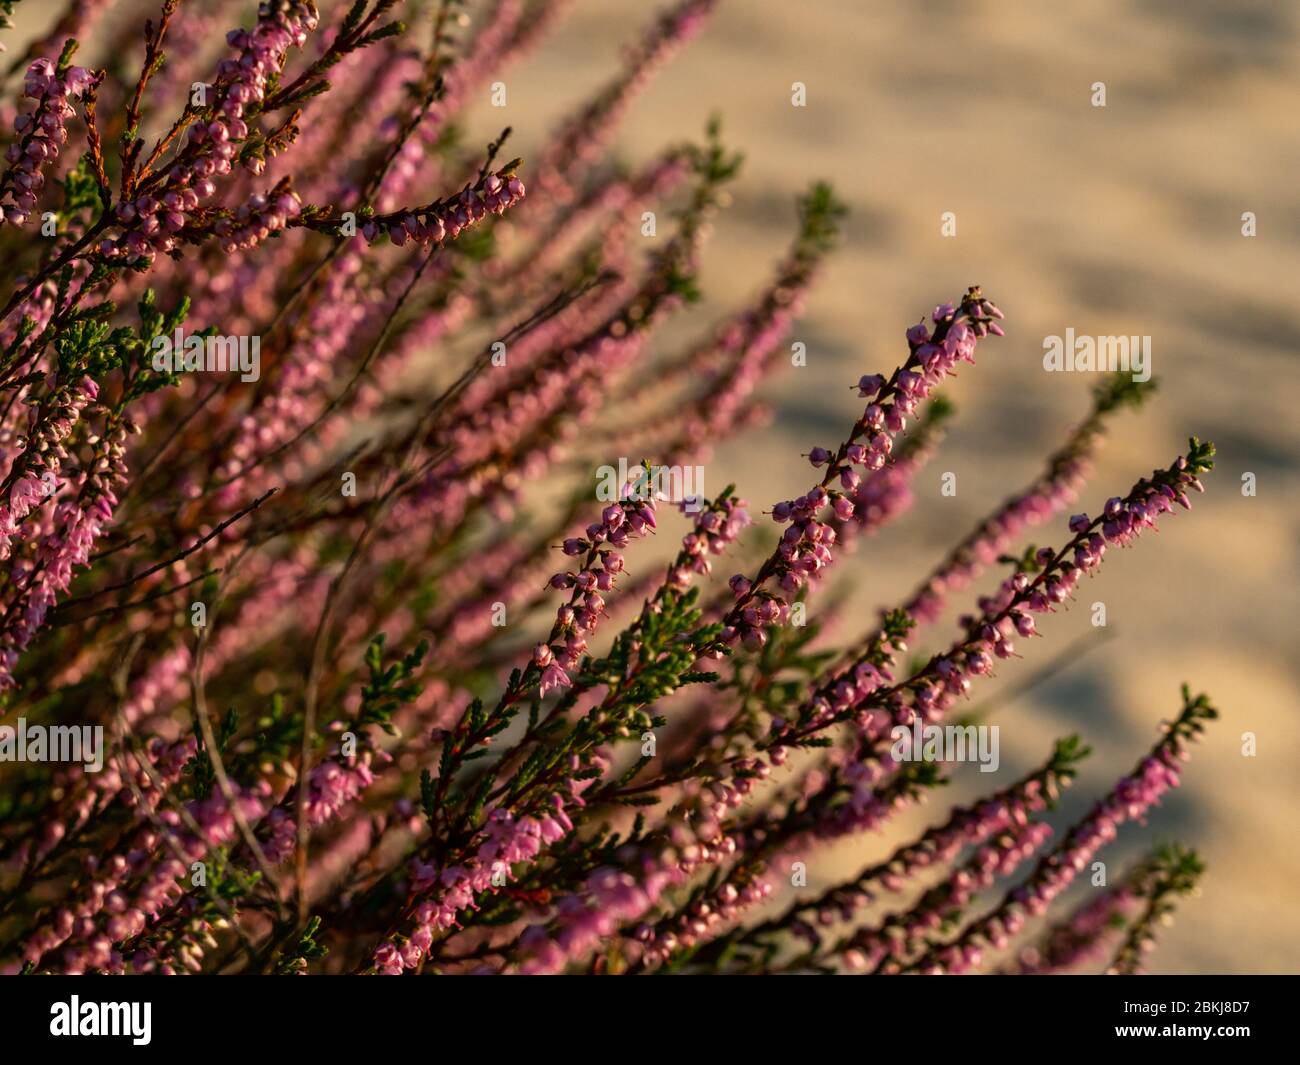 Heather bush growing on dunes of former training military ground. Sunset. Selective focus. Stock Photo